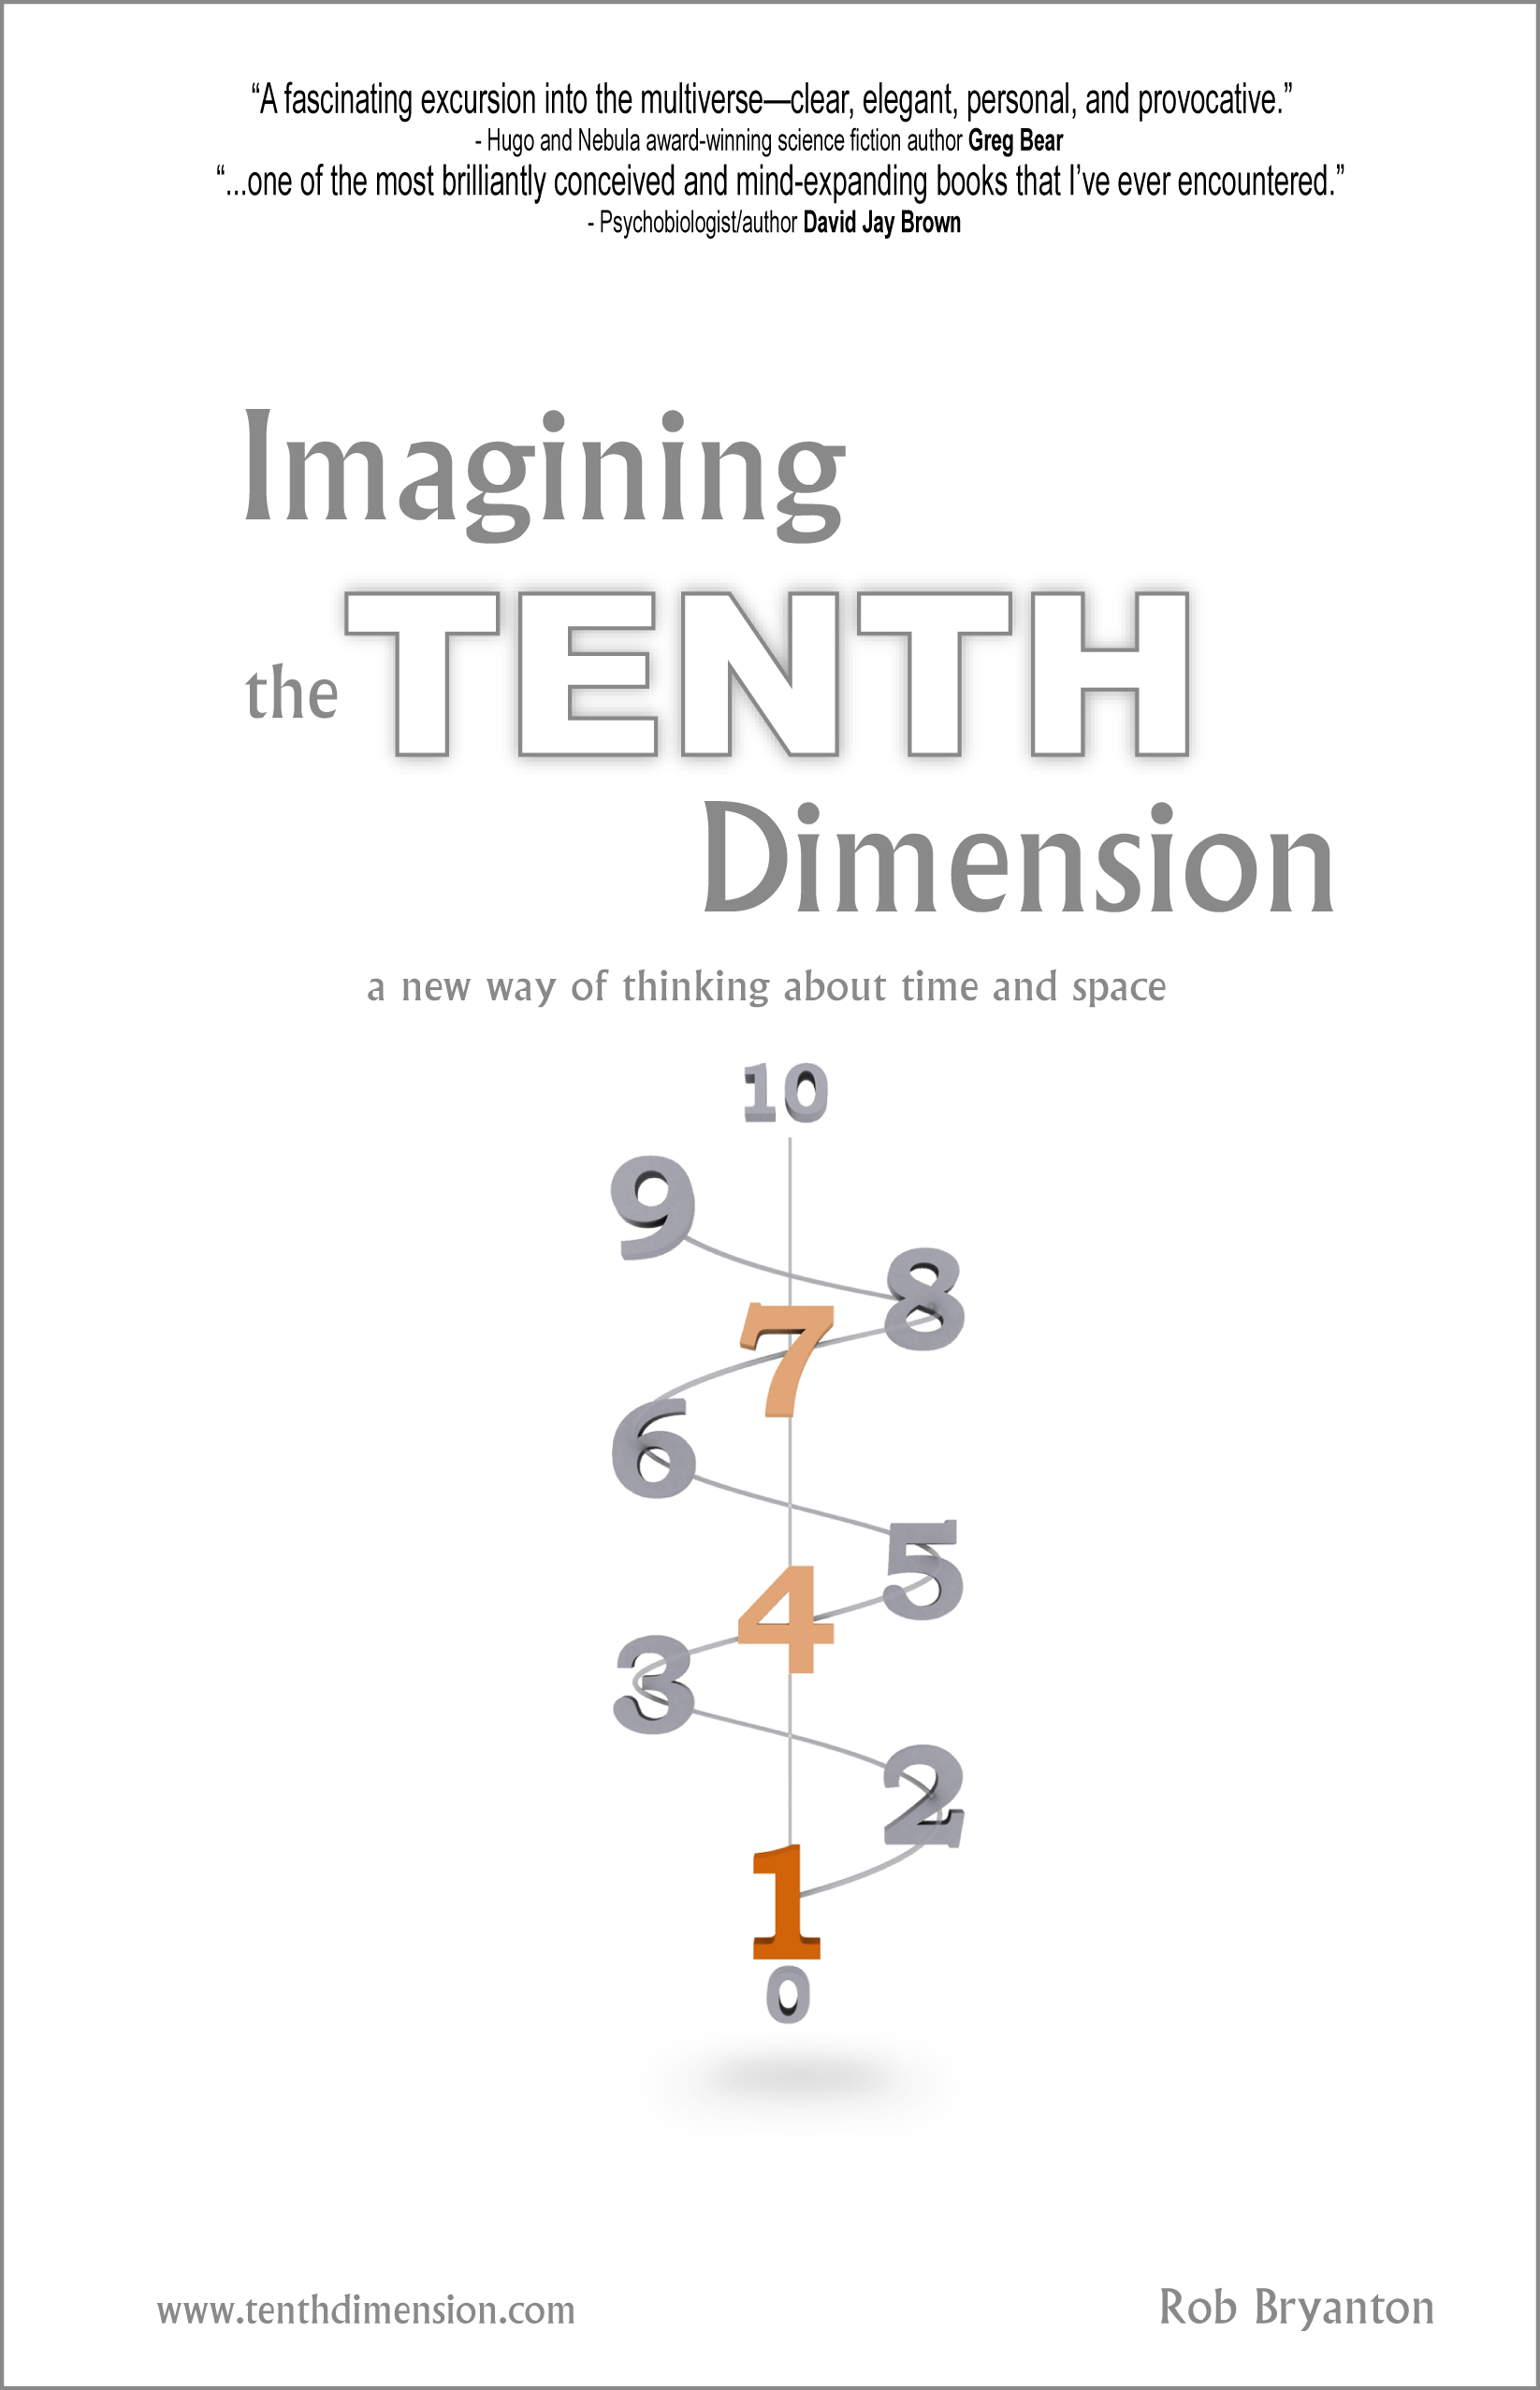 The Cover of Rob Bryanton's book, Imagining the Tenth Dimension